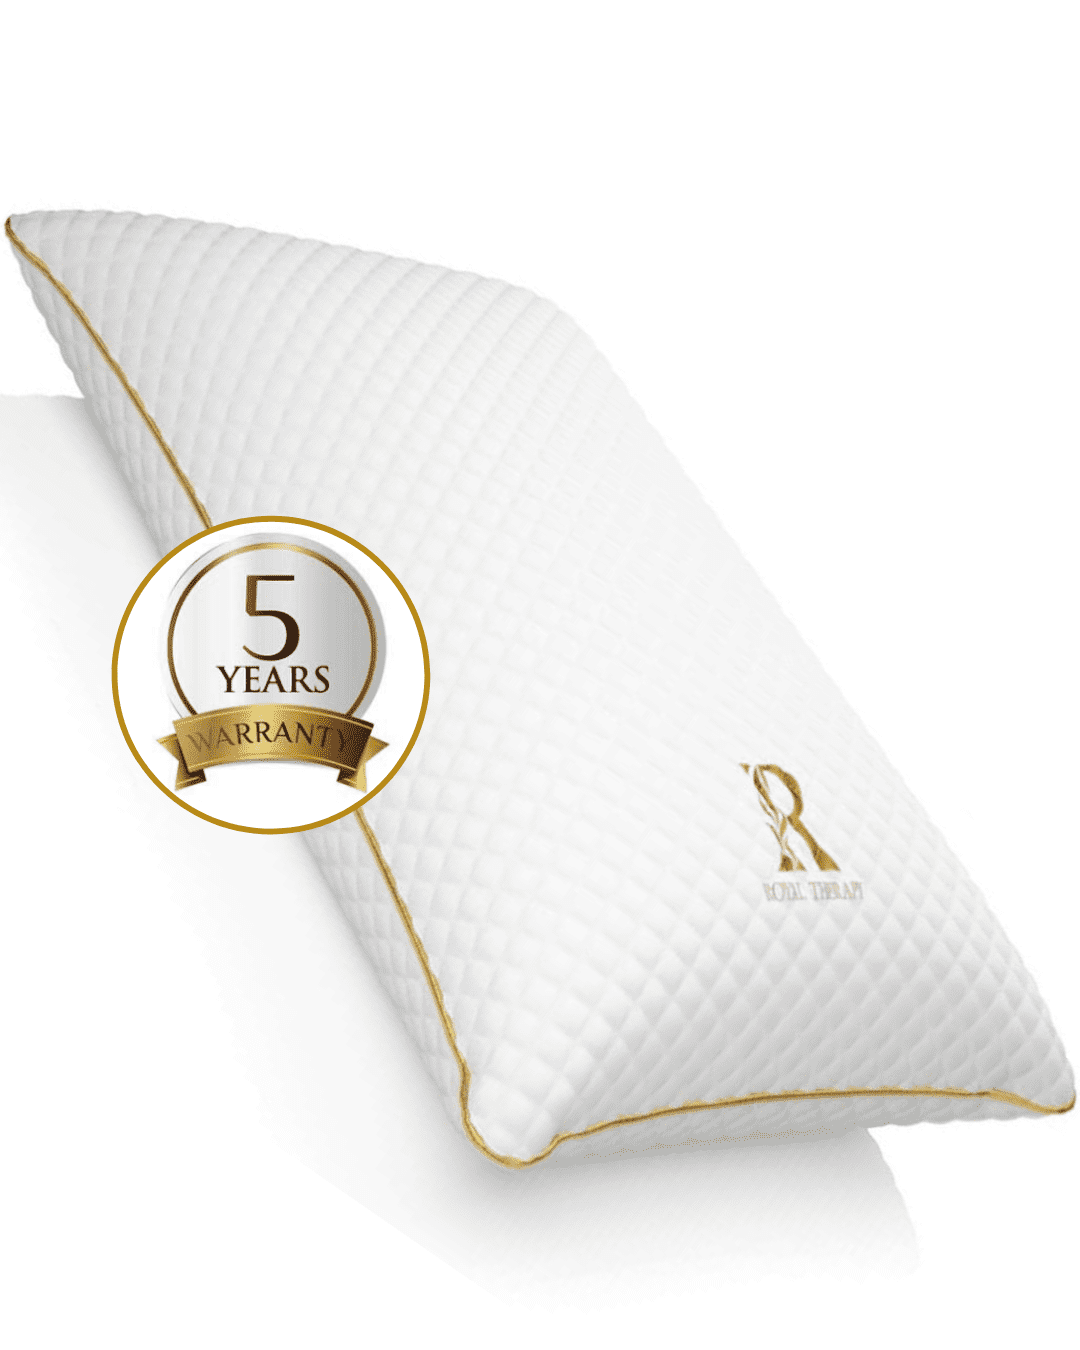 ROYAL THERAPY Queen Memory Foam Pillow, Shredded Bed Pillow for Neck & Shoulder Support, Orthopedic Contour Pillow